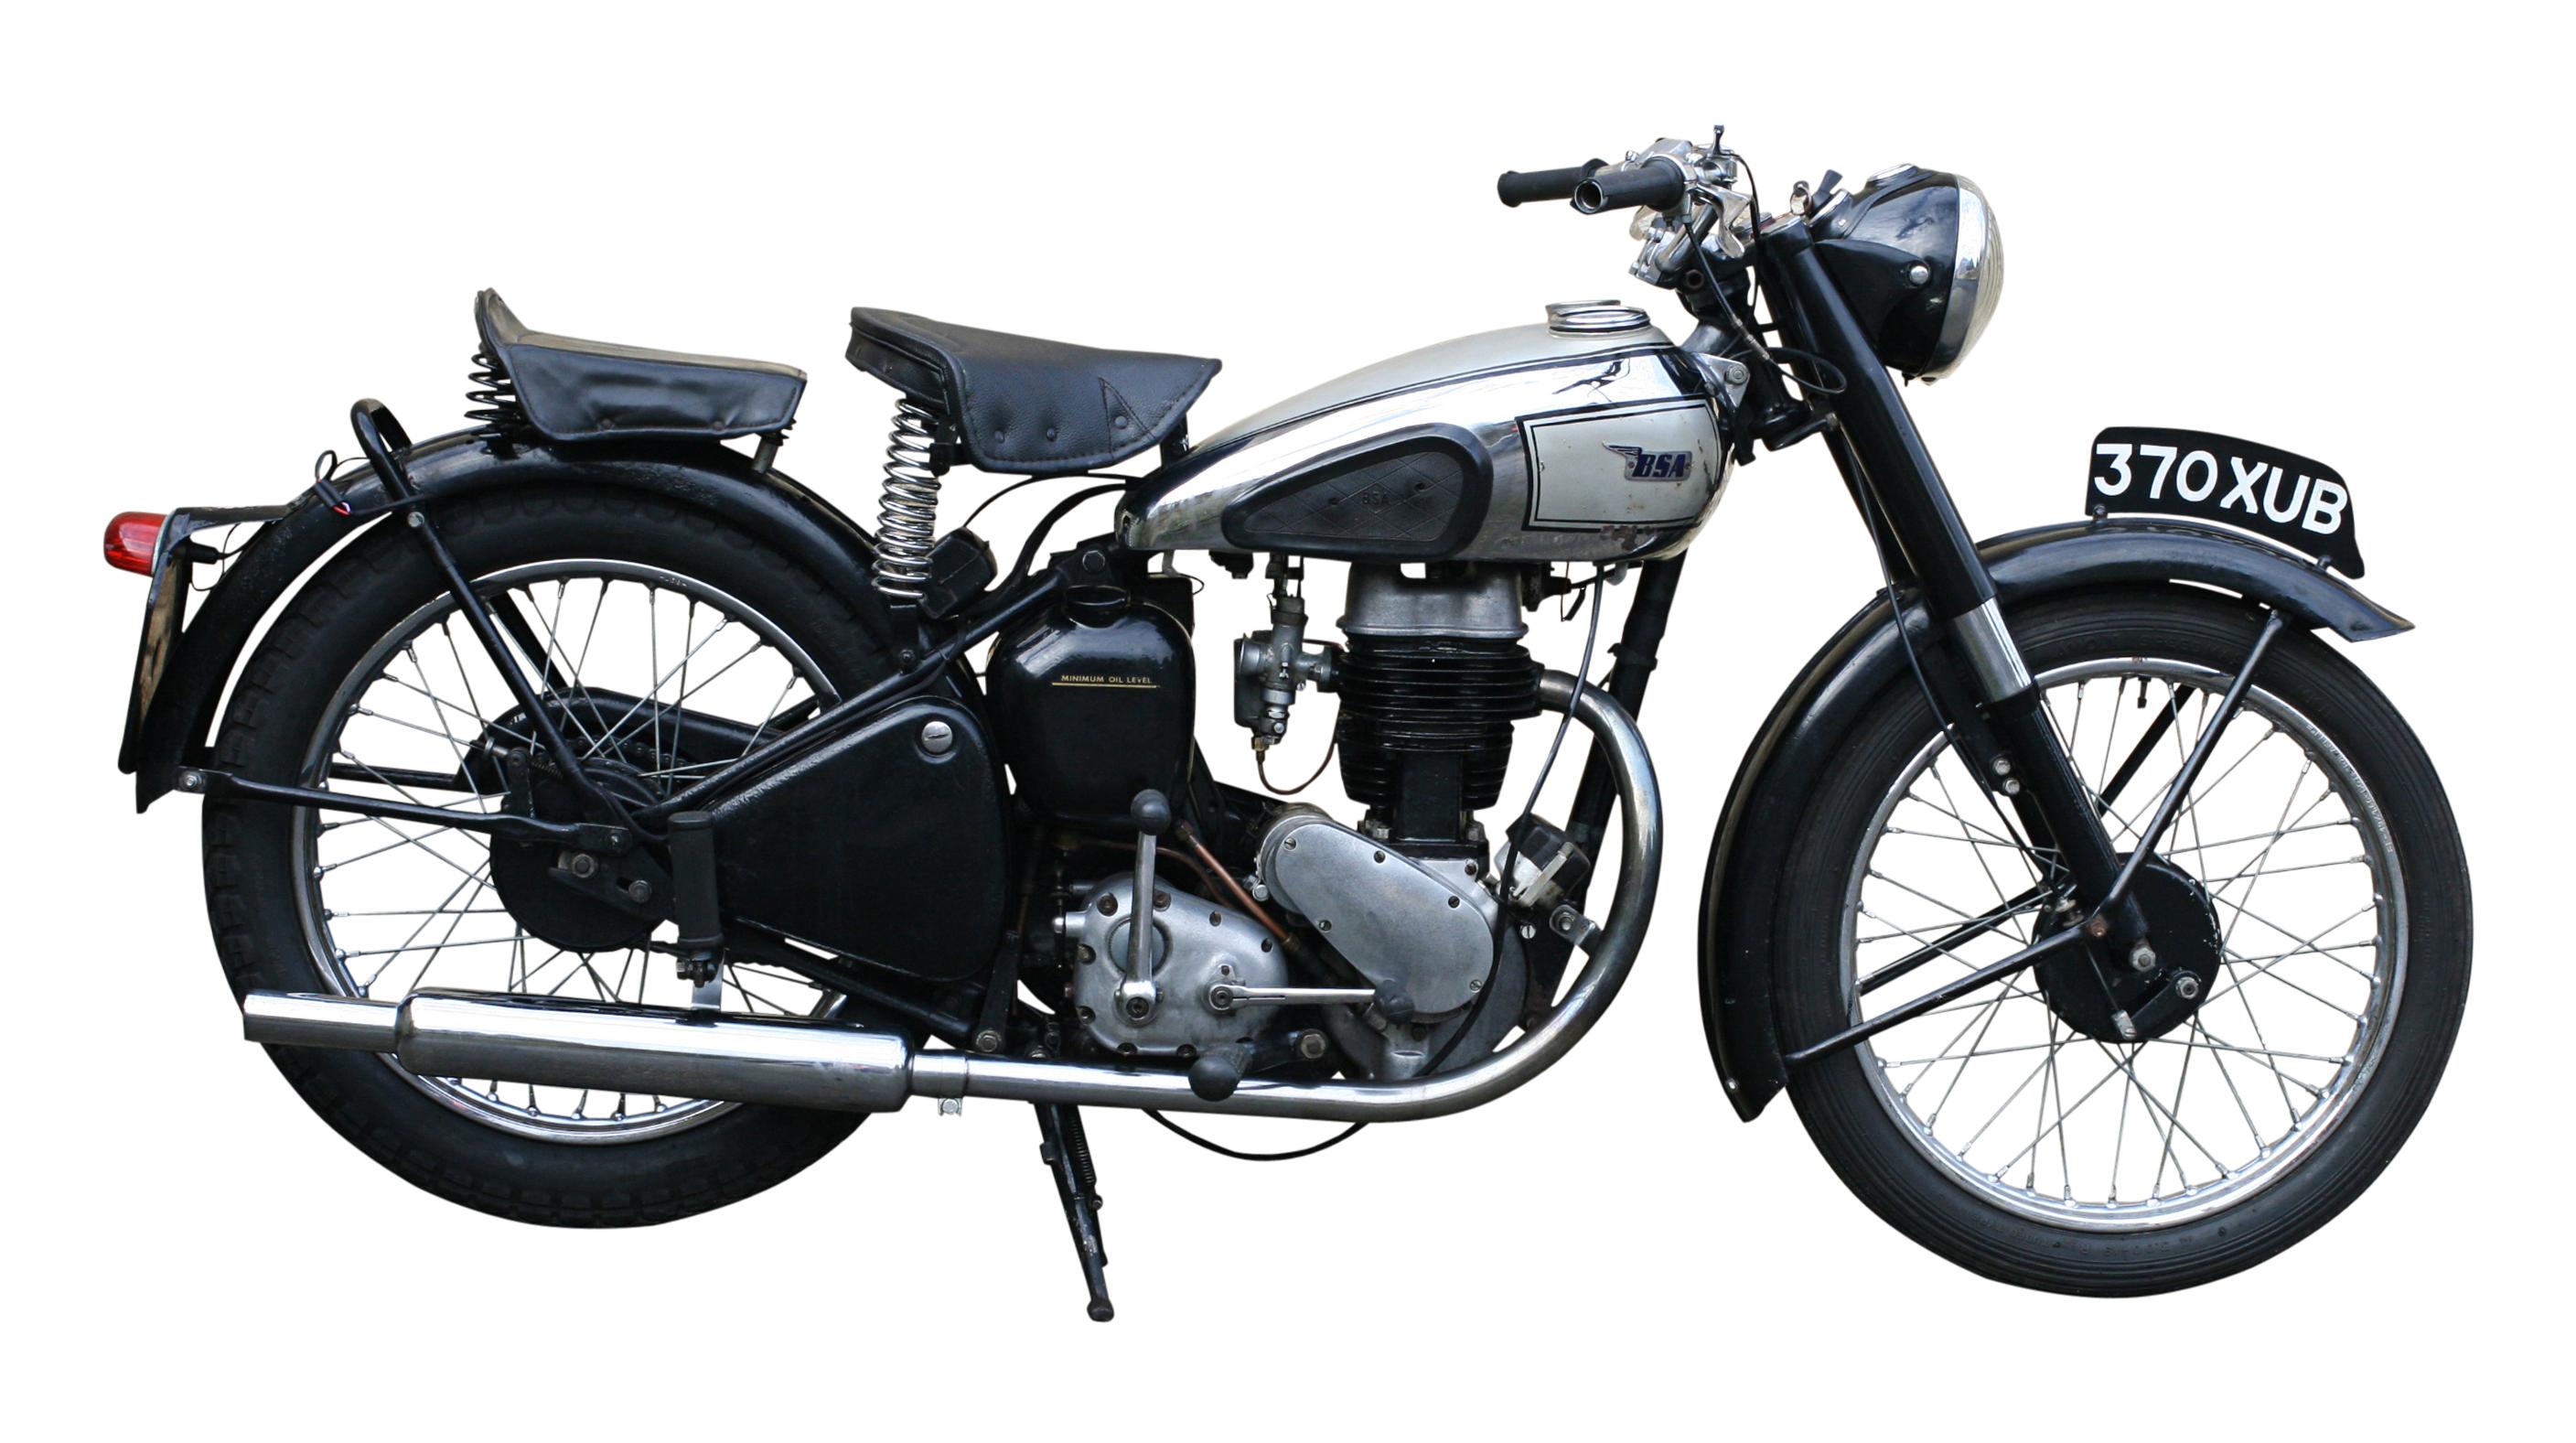 BSA C11 250cc Motorcycle.
A 1946 BSA C11, 250cc single-cylinder ohv motorcycle manufactured by the British company BSA (Birmingham small arms company). The C11 was developed before the second world war from the sidevalve C10, it was launched in